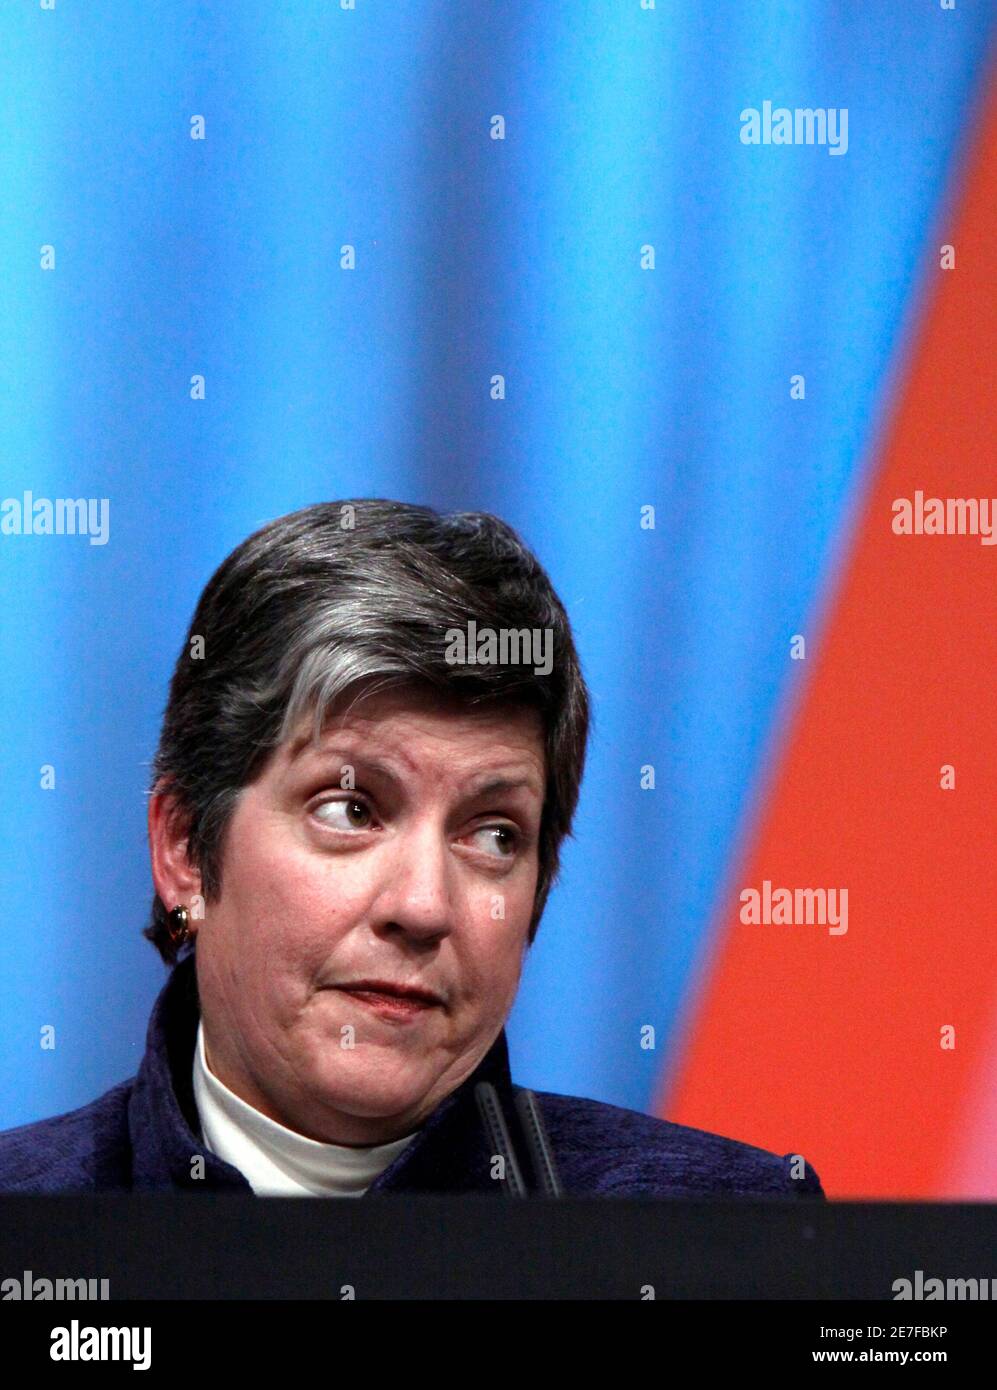 Homeland Security Secretary Janet Napolitano speaks at the International Association of Chiefs of Police 116th annual conference in Denver October 5, 2009.  REUTERS/Rick Wilking (UNITED STATES POLITICS CRIME LAW) Stock Photo